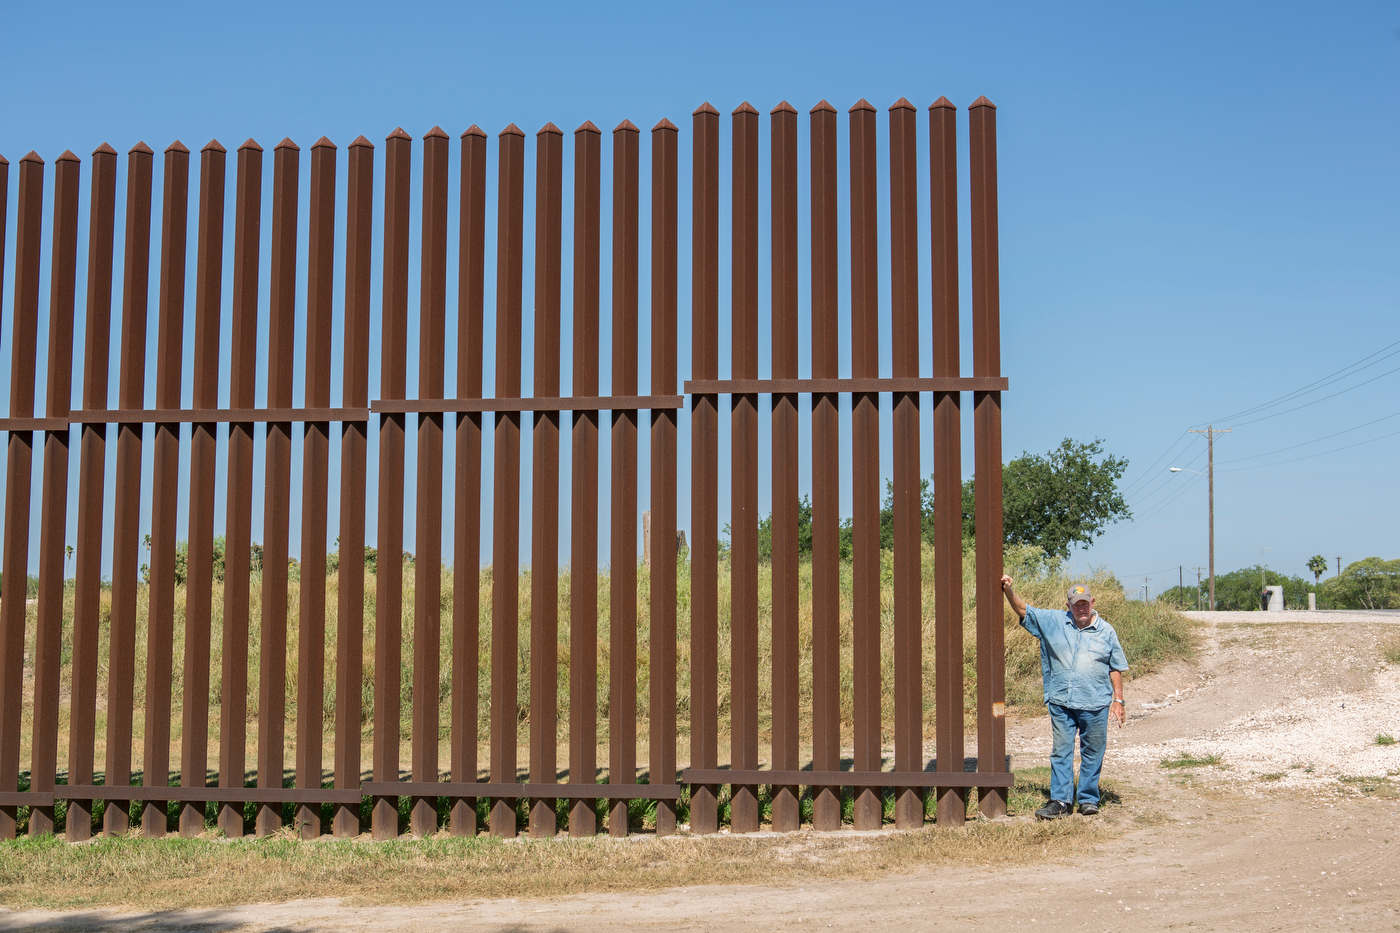 Rusty Monsees, an anti-immigration activist whose land is cut in half by the border wall, stands near the fence on his property.